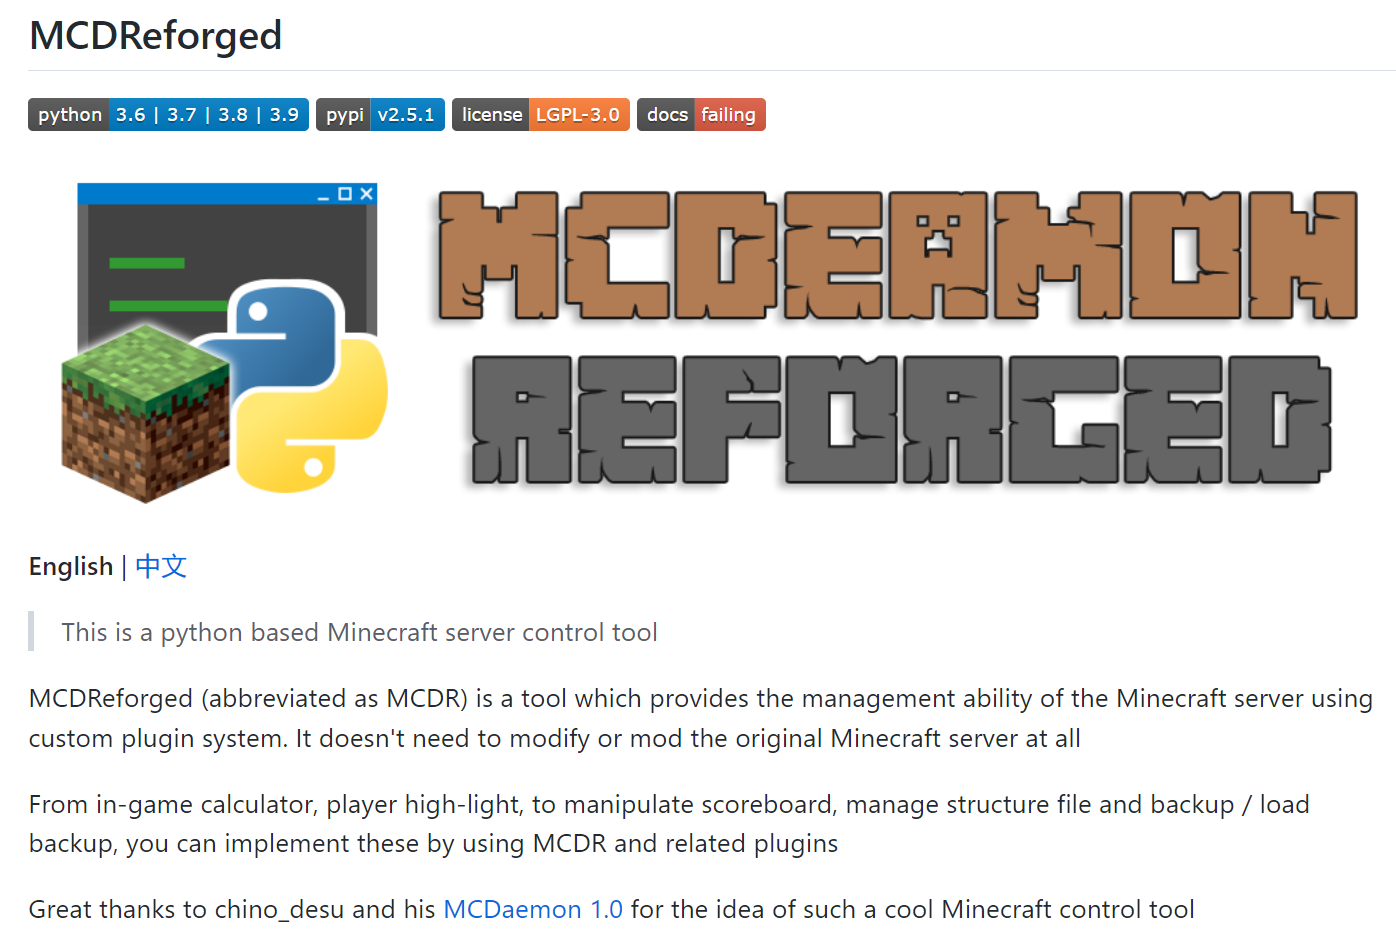 The readme of MCDReforged